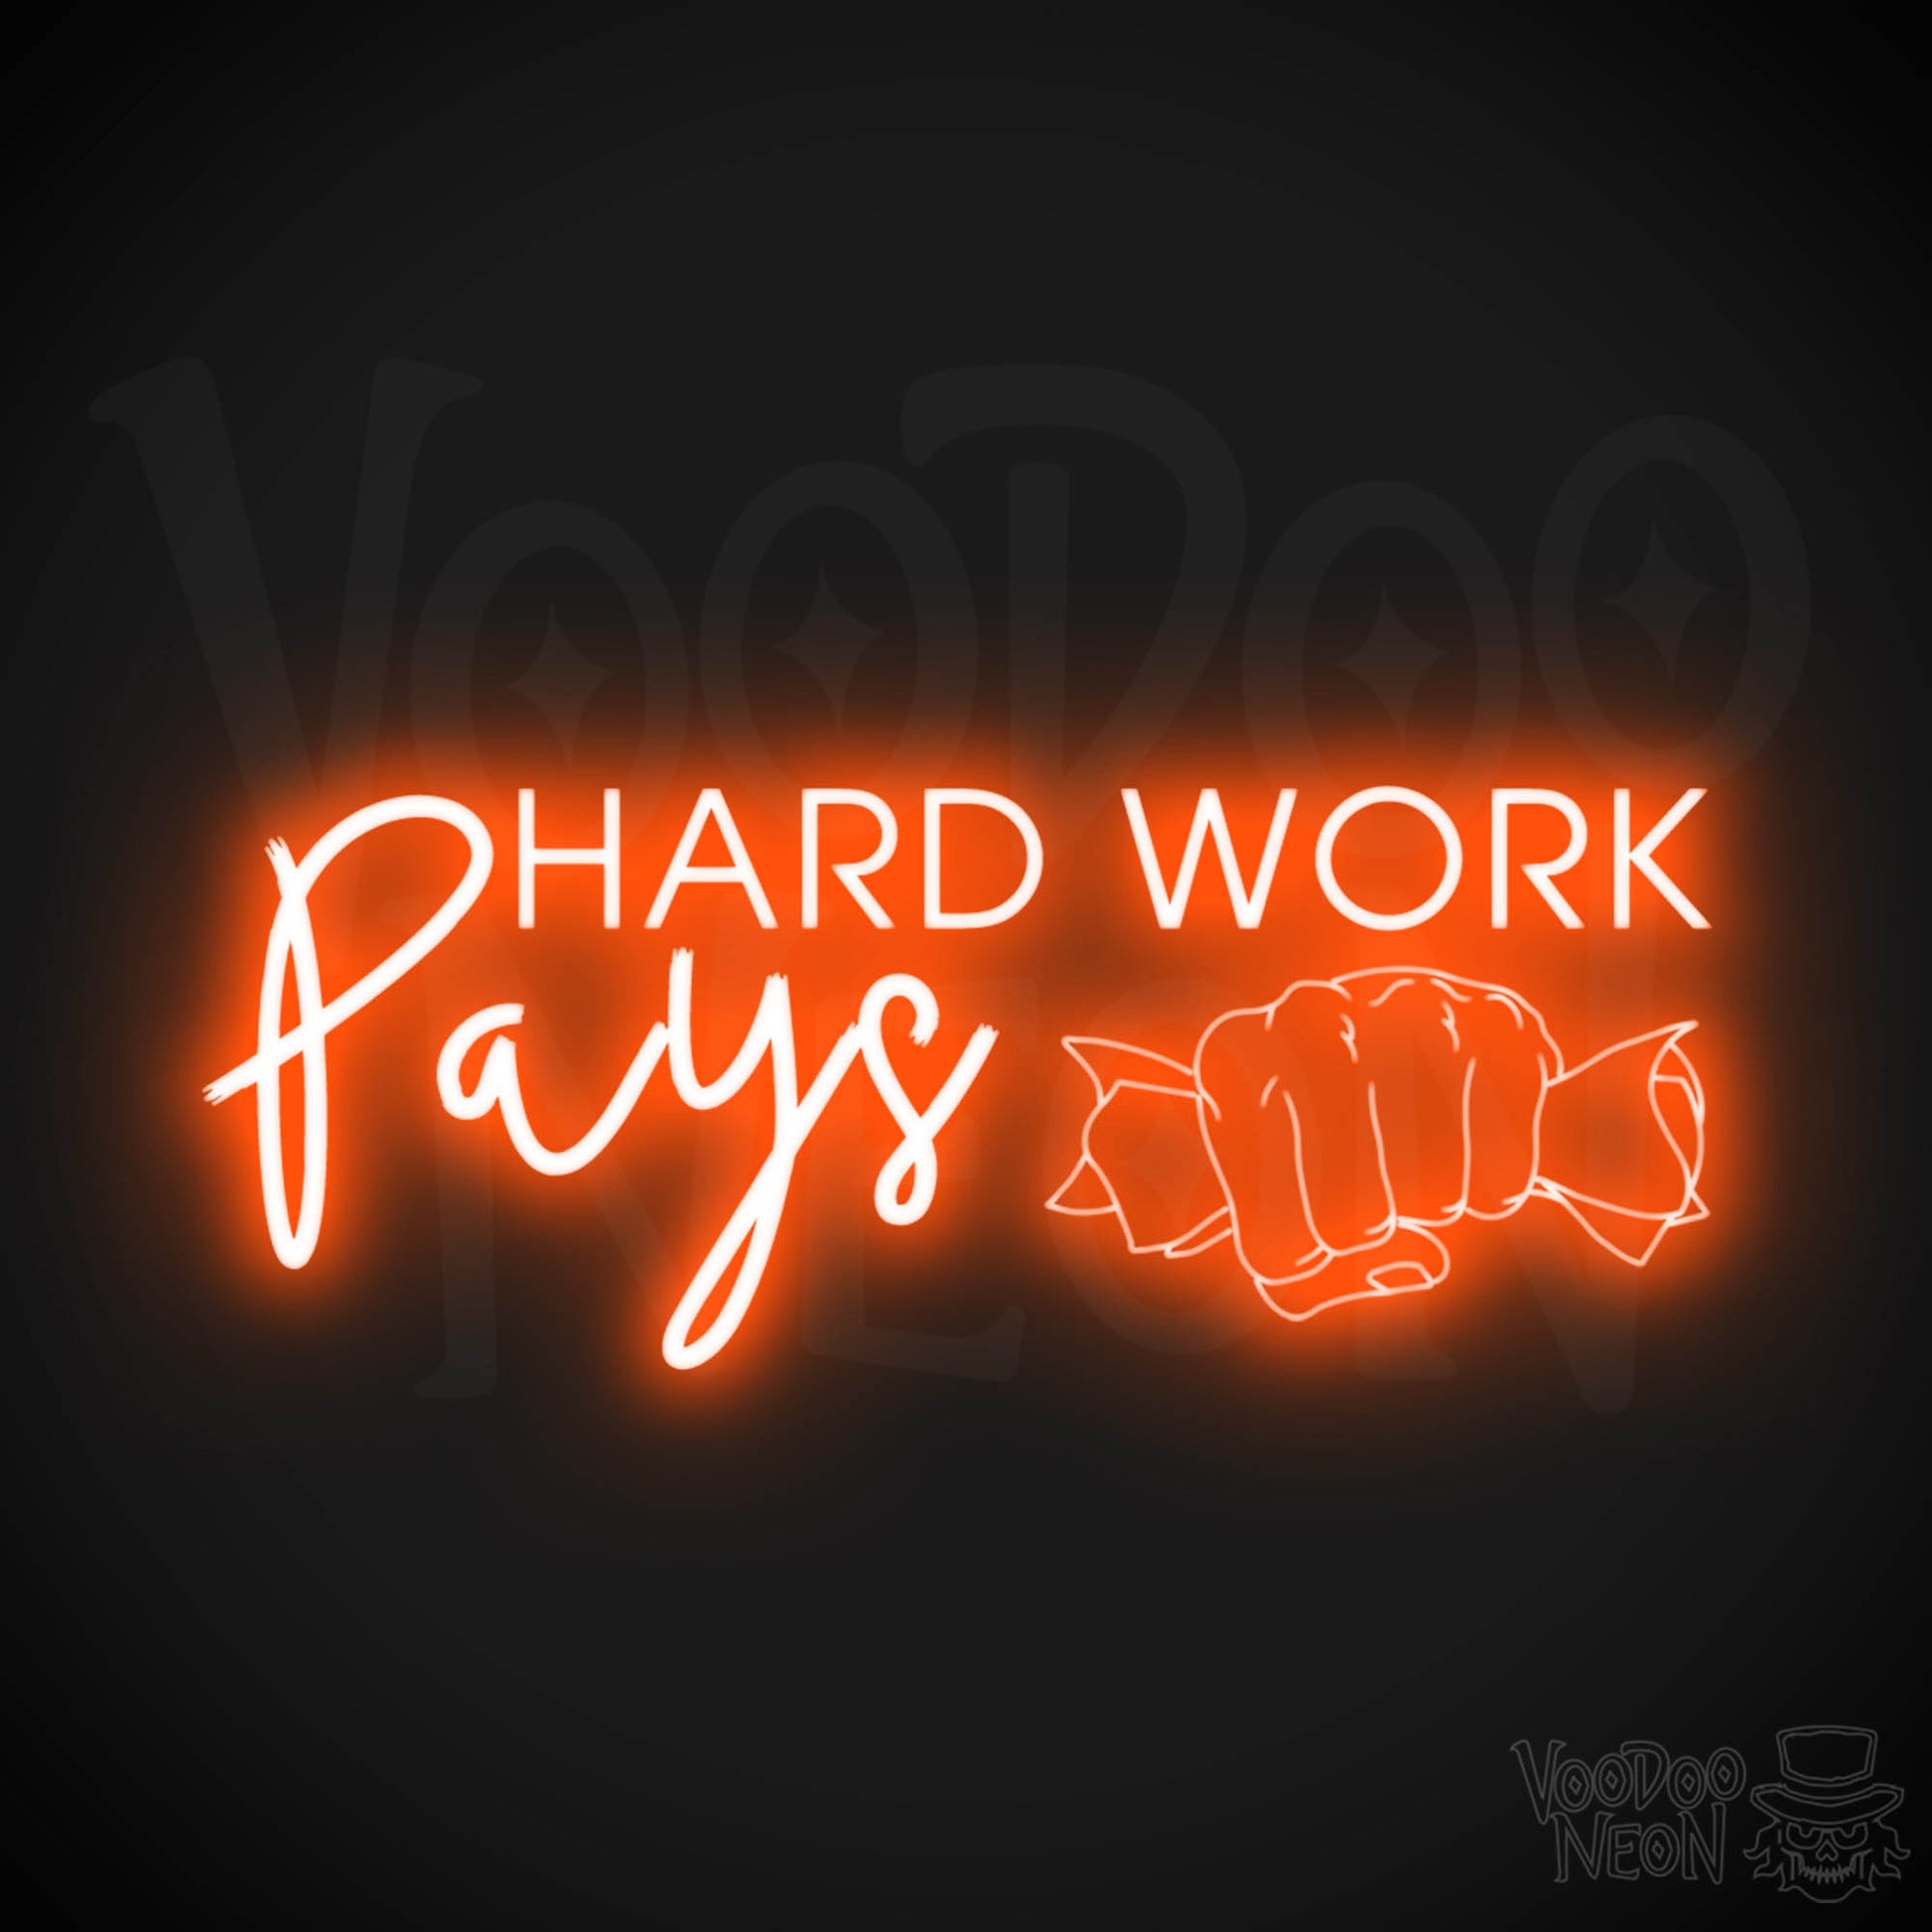 Hard Work Pays Neon Sign - LED Neon Wall Art - Color Orange